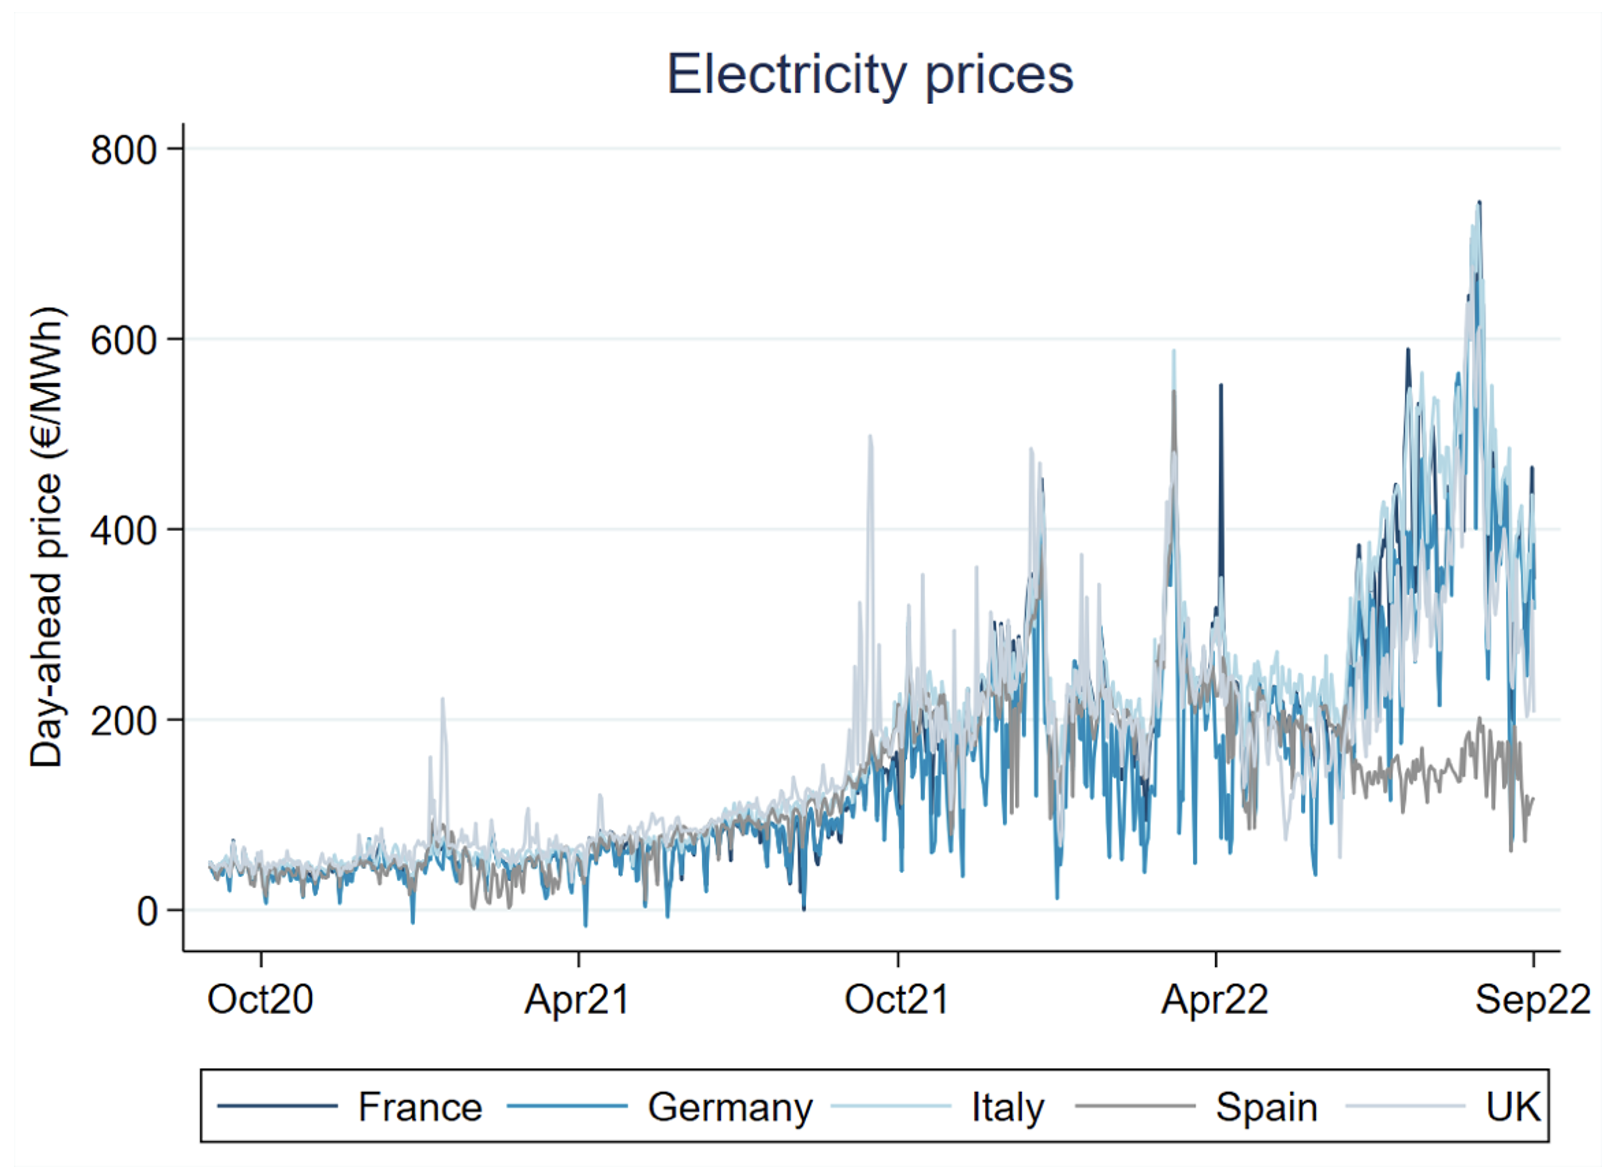 Figure 1 Wholesale electricity prices across Europe in September 2020-September 2022